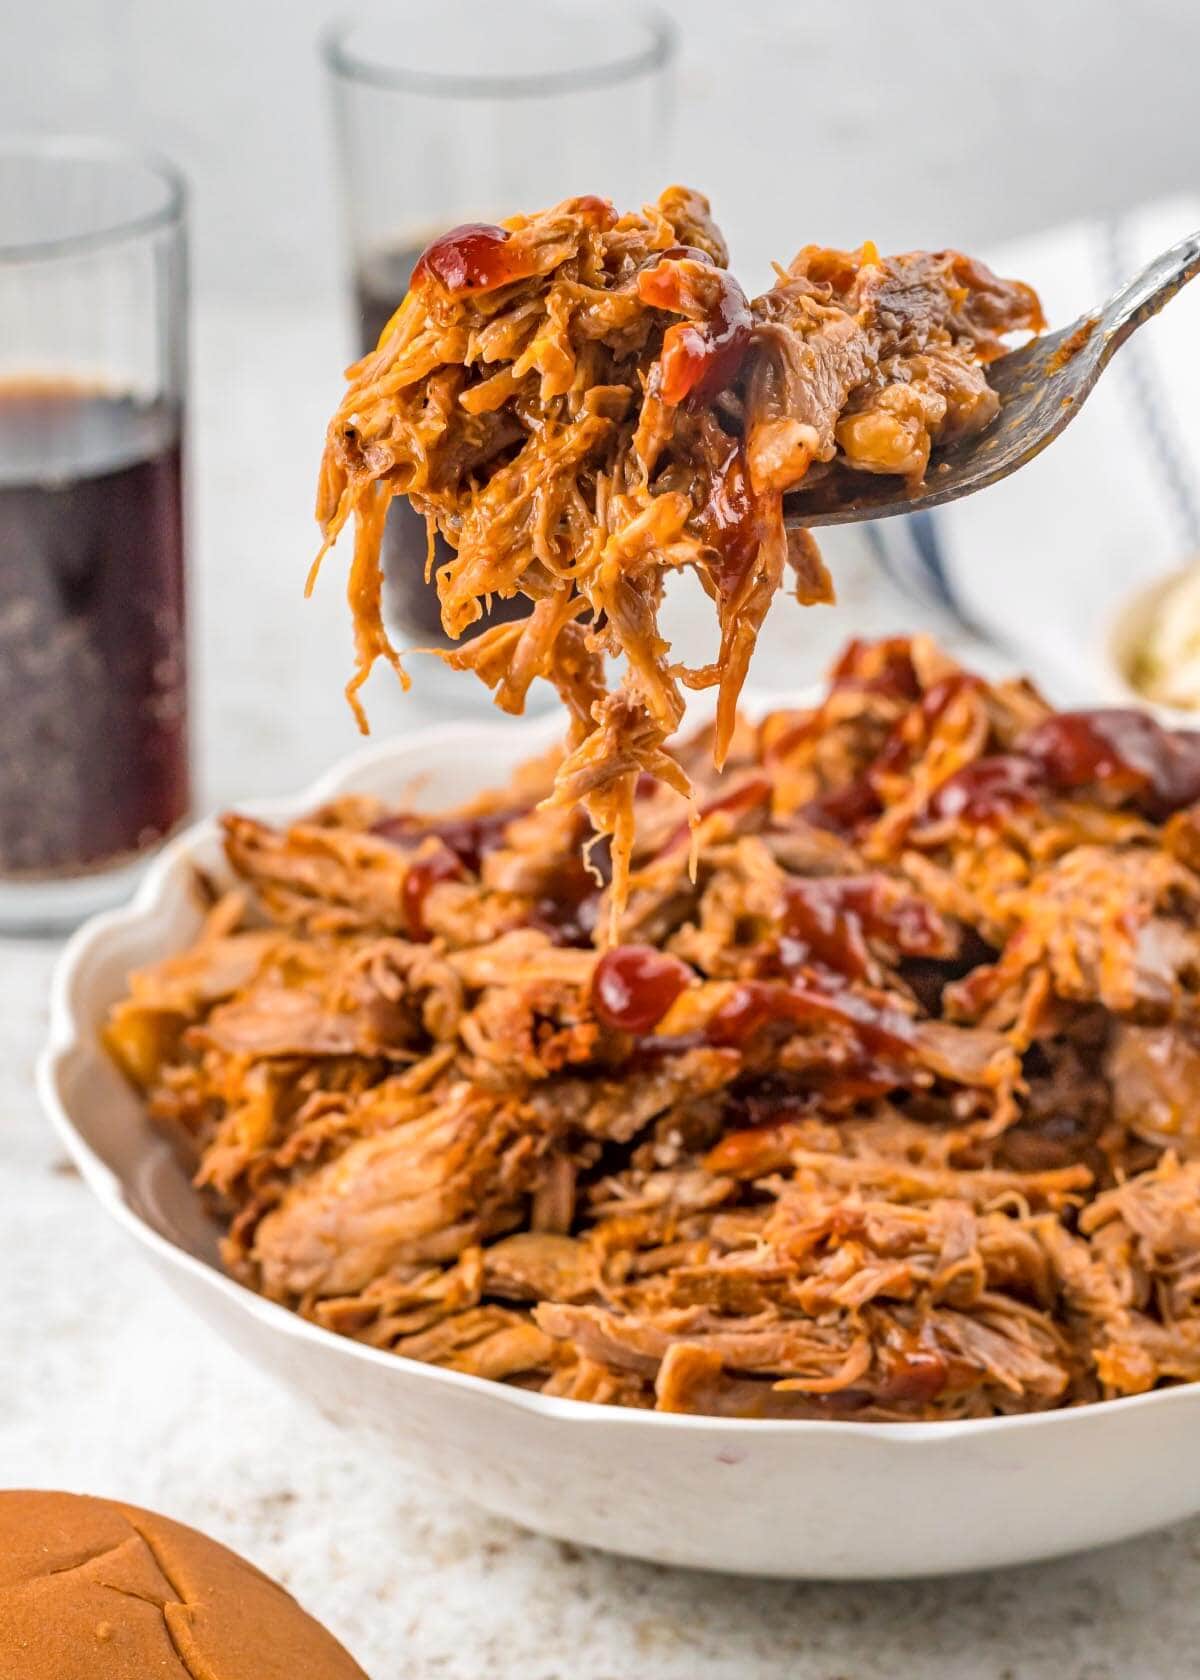 Slow Cooker Cherry Cola Pulled Pork in white dish with some on fork.